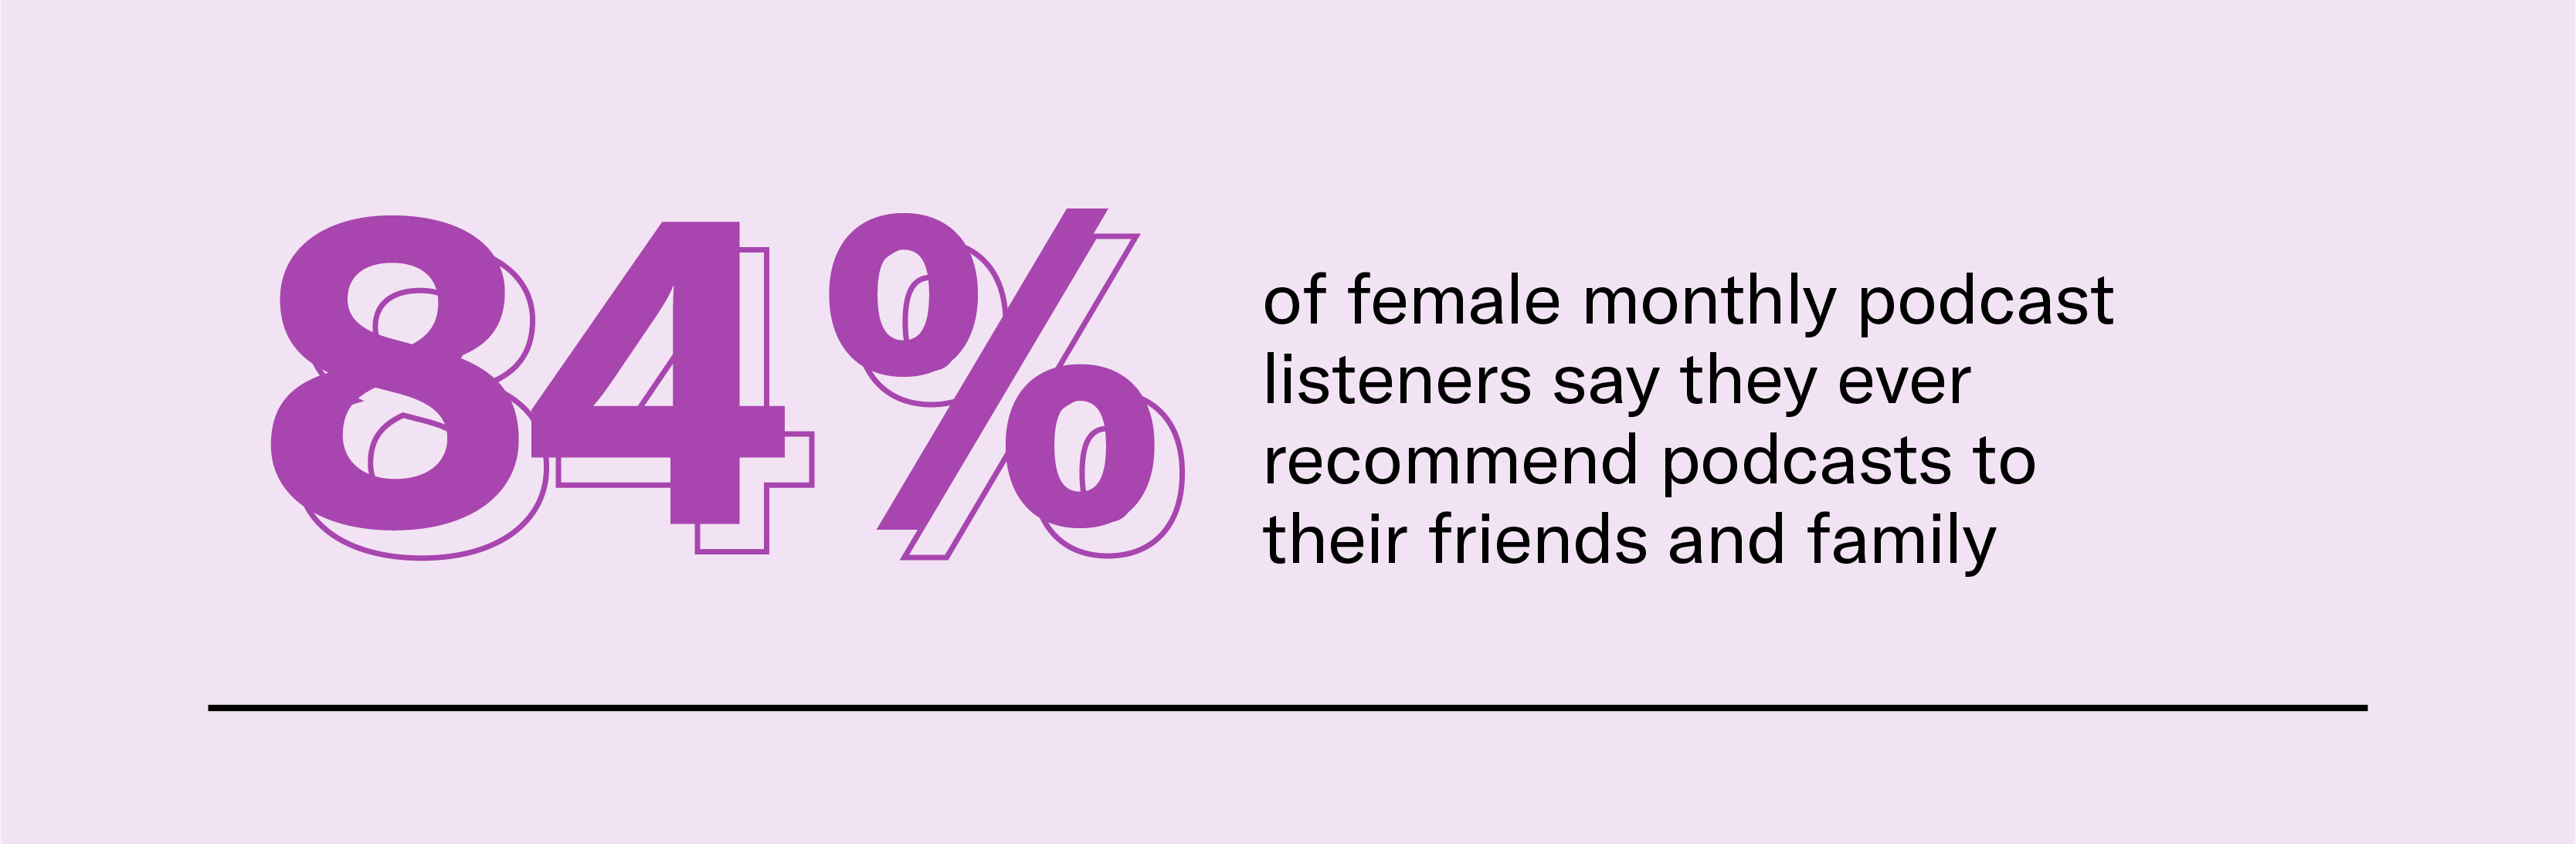 Women recommend podcasts to other women